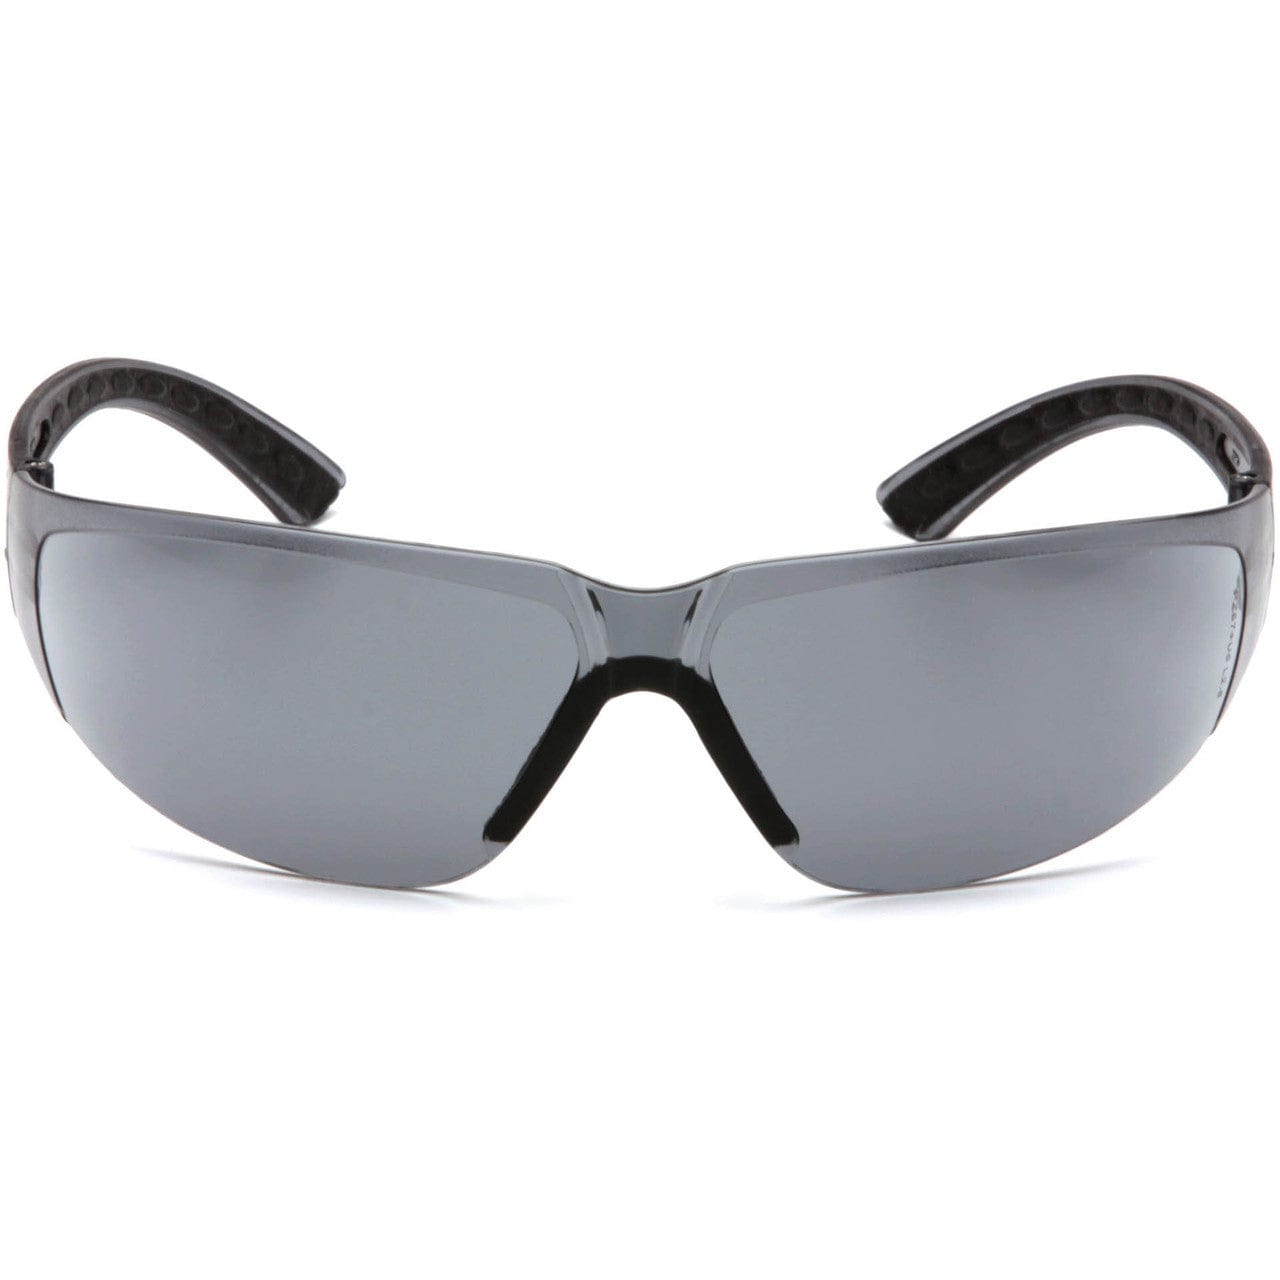 Pyramex Cortez Safety Glasses Black Temples Gray Lens SB3620 Front